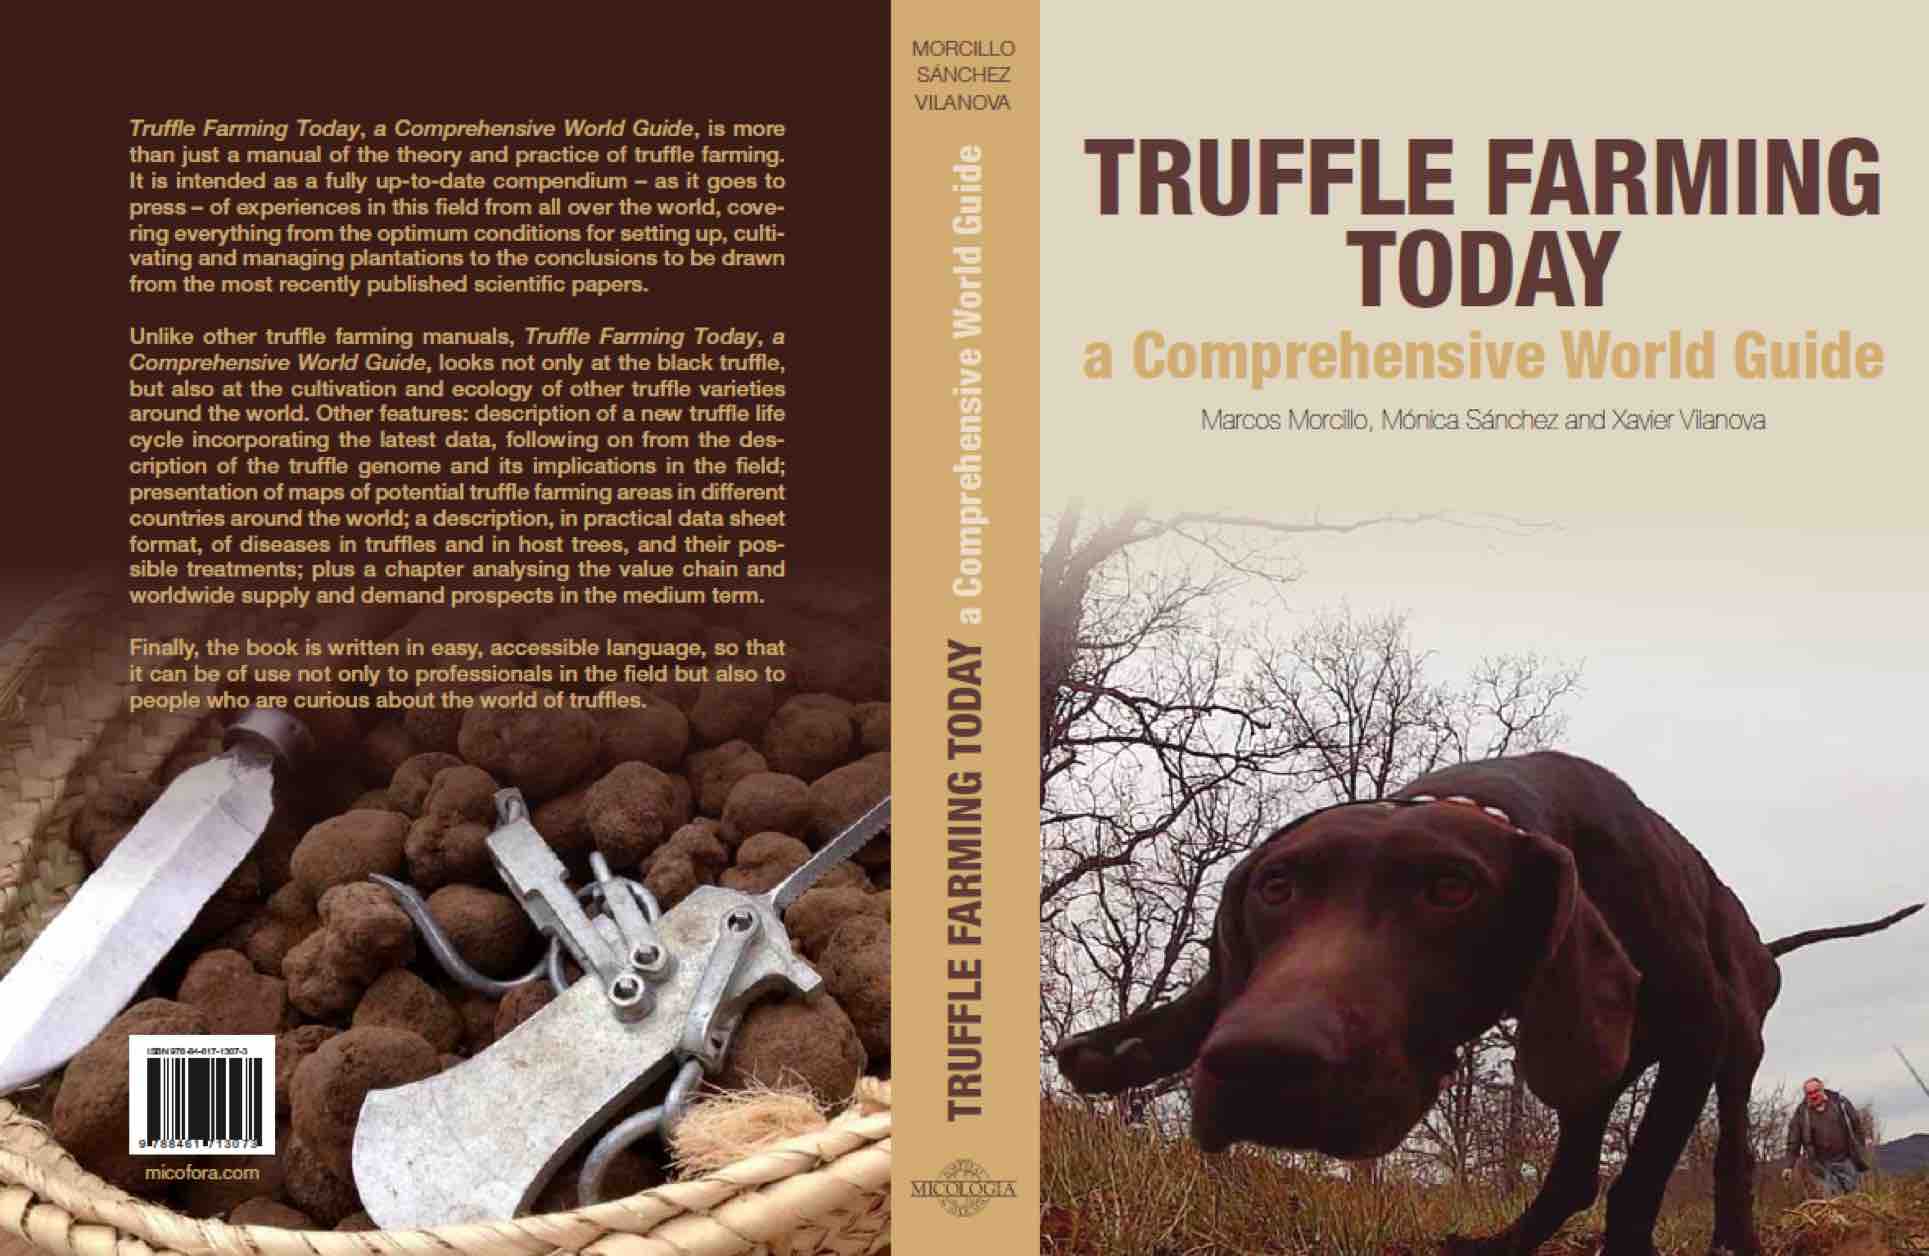 Truffle Farming Today. A comprehensive world guide